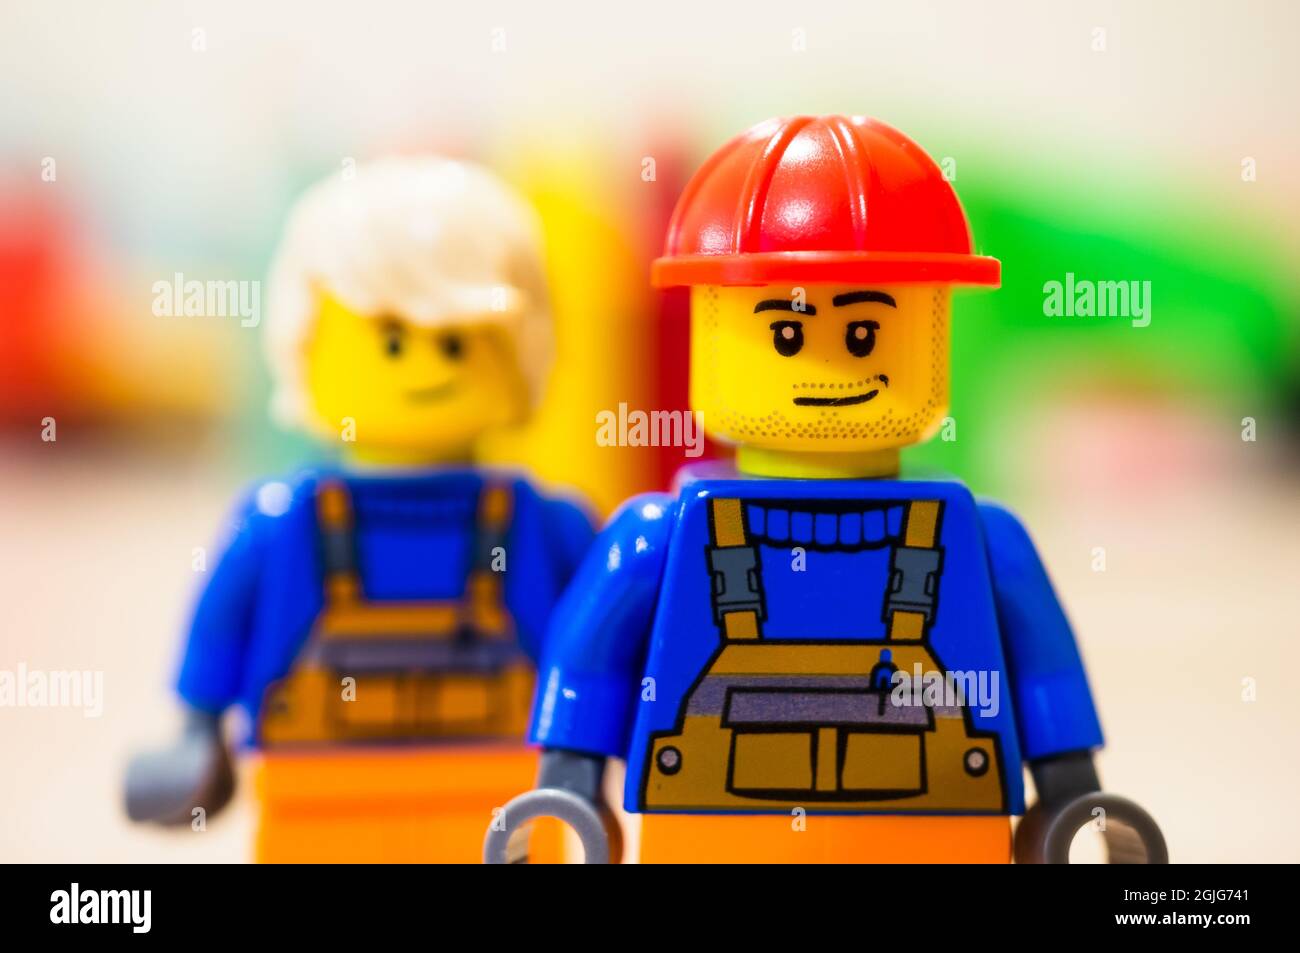 POZNAN, POLAND - Sep 09, 2021: Lego construction worker with satisfied emotion standing in front of other worker with long hair in soft focus backgrou Stock Photo